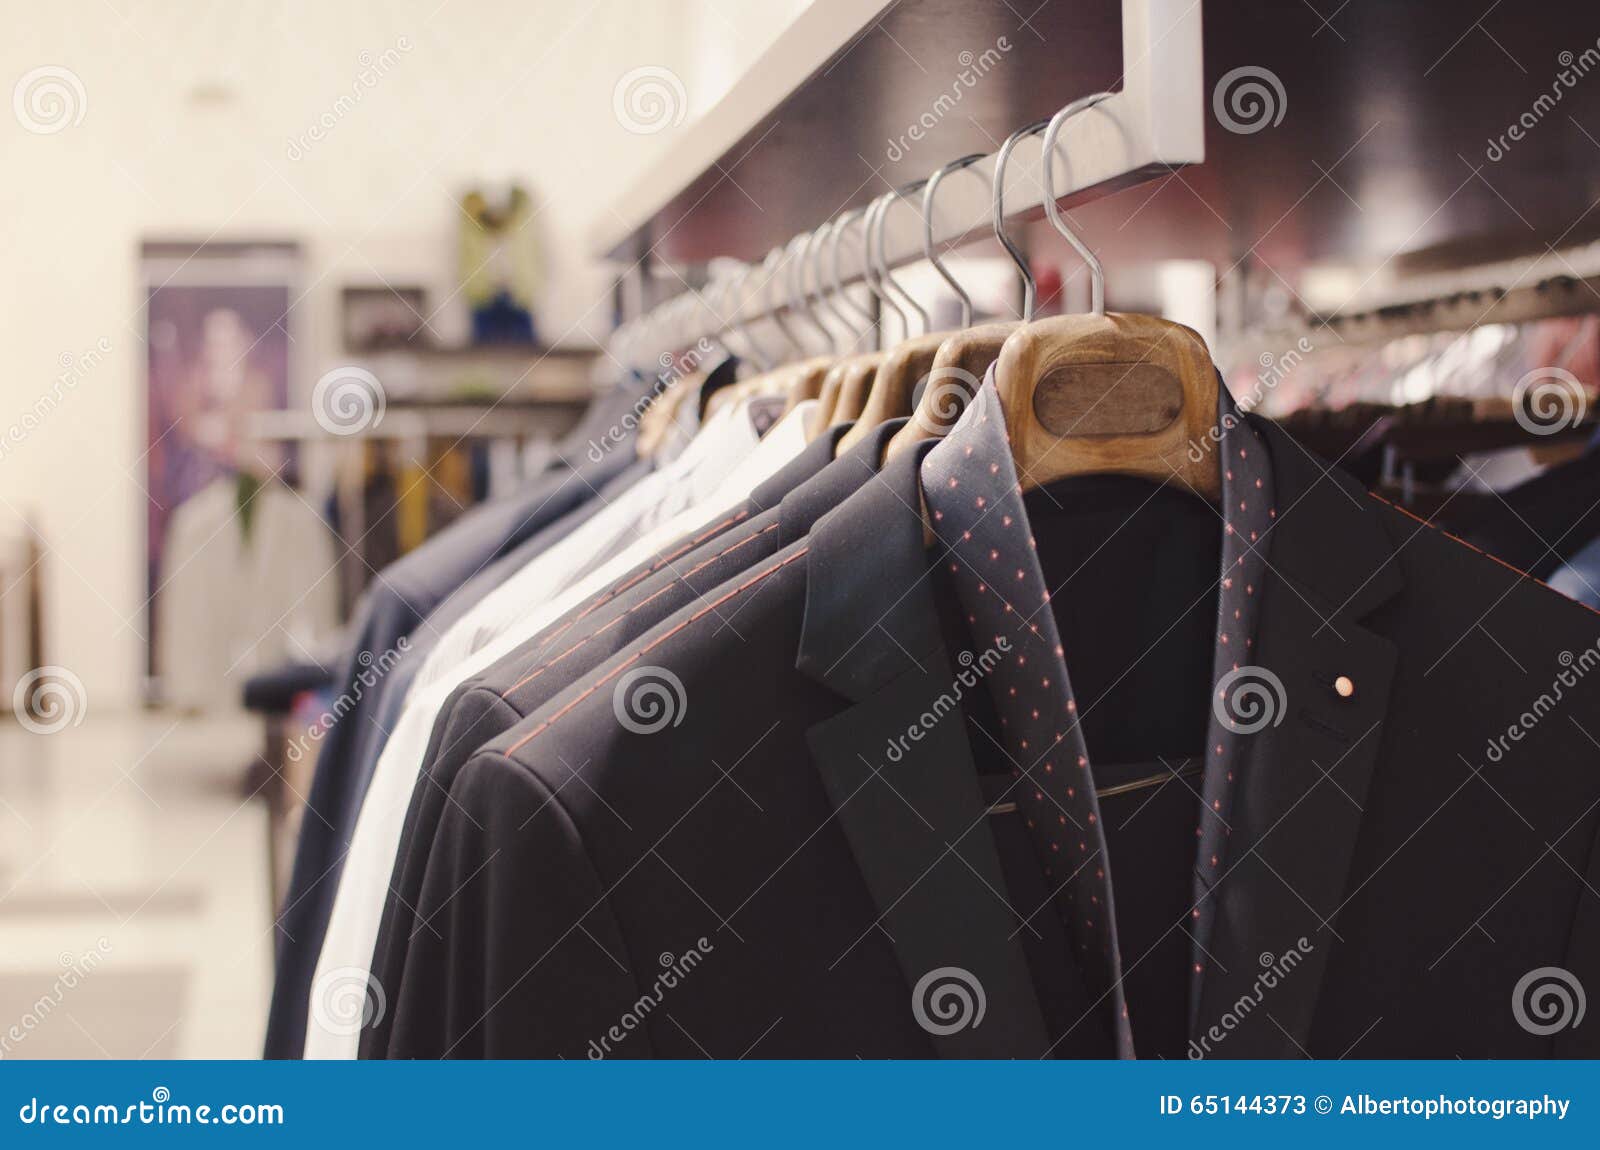 Mens clothing stock image. Image of professional, room - 65144373